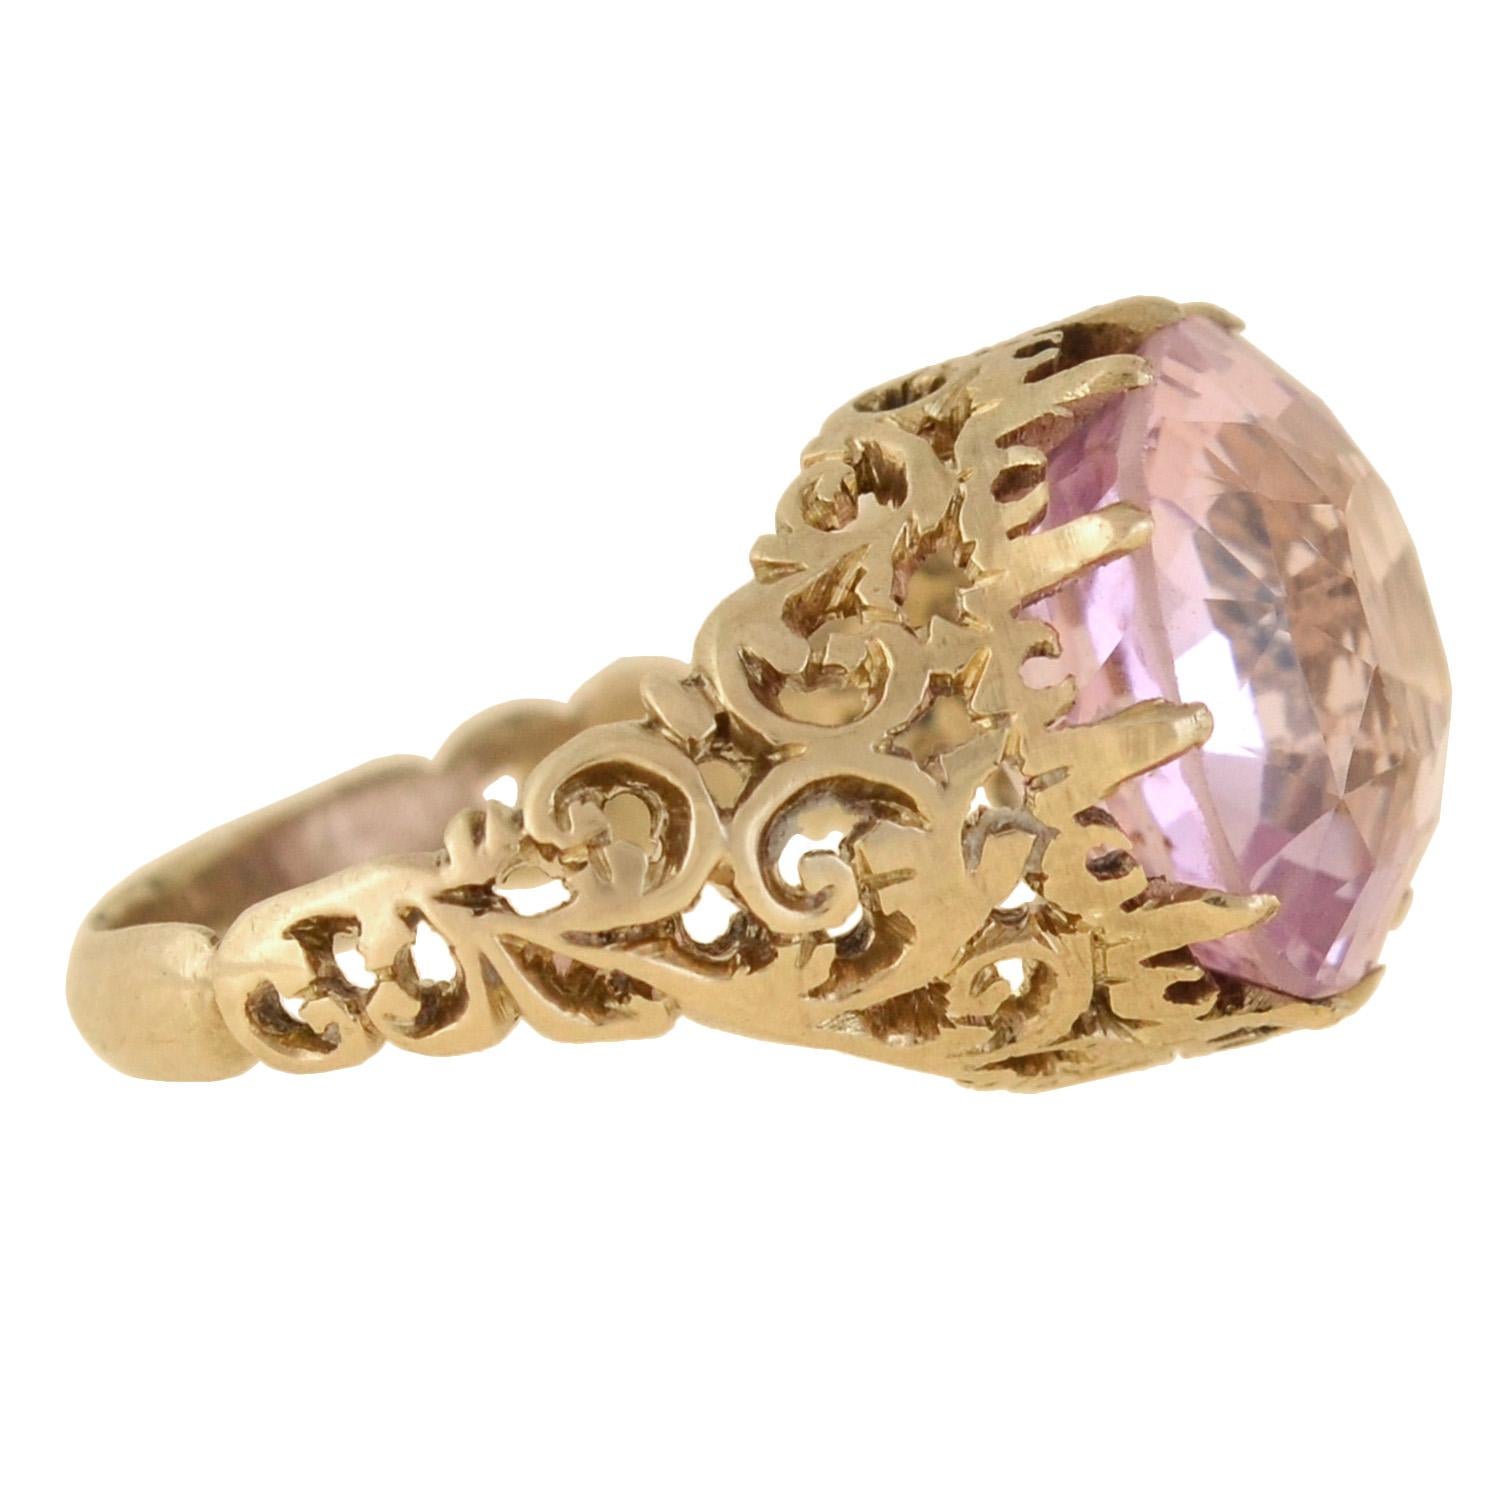 An exquisite pink sapphire ring from the early Victorian (ca1850) era! Crafted in 14kt yellow gold, this piece adorns a stunning 11.67ct Ceylon sapphire at the center of an intricate filigree setting. The Cushion Cut stone is of Sri Lankan origin,